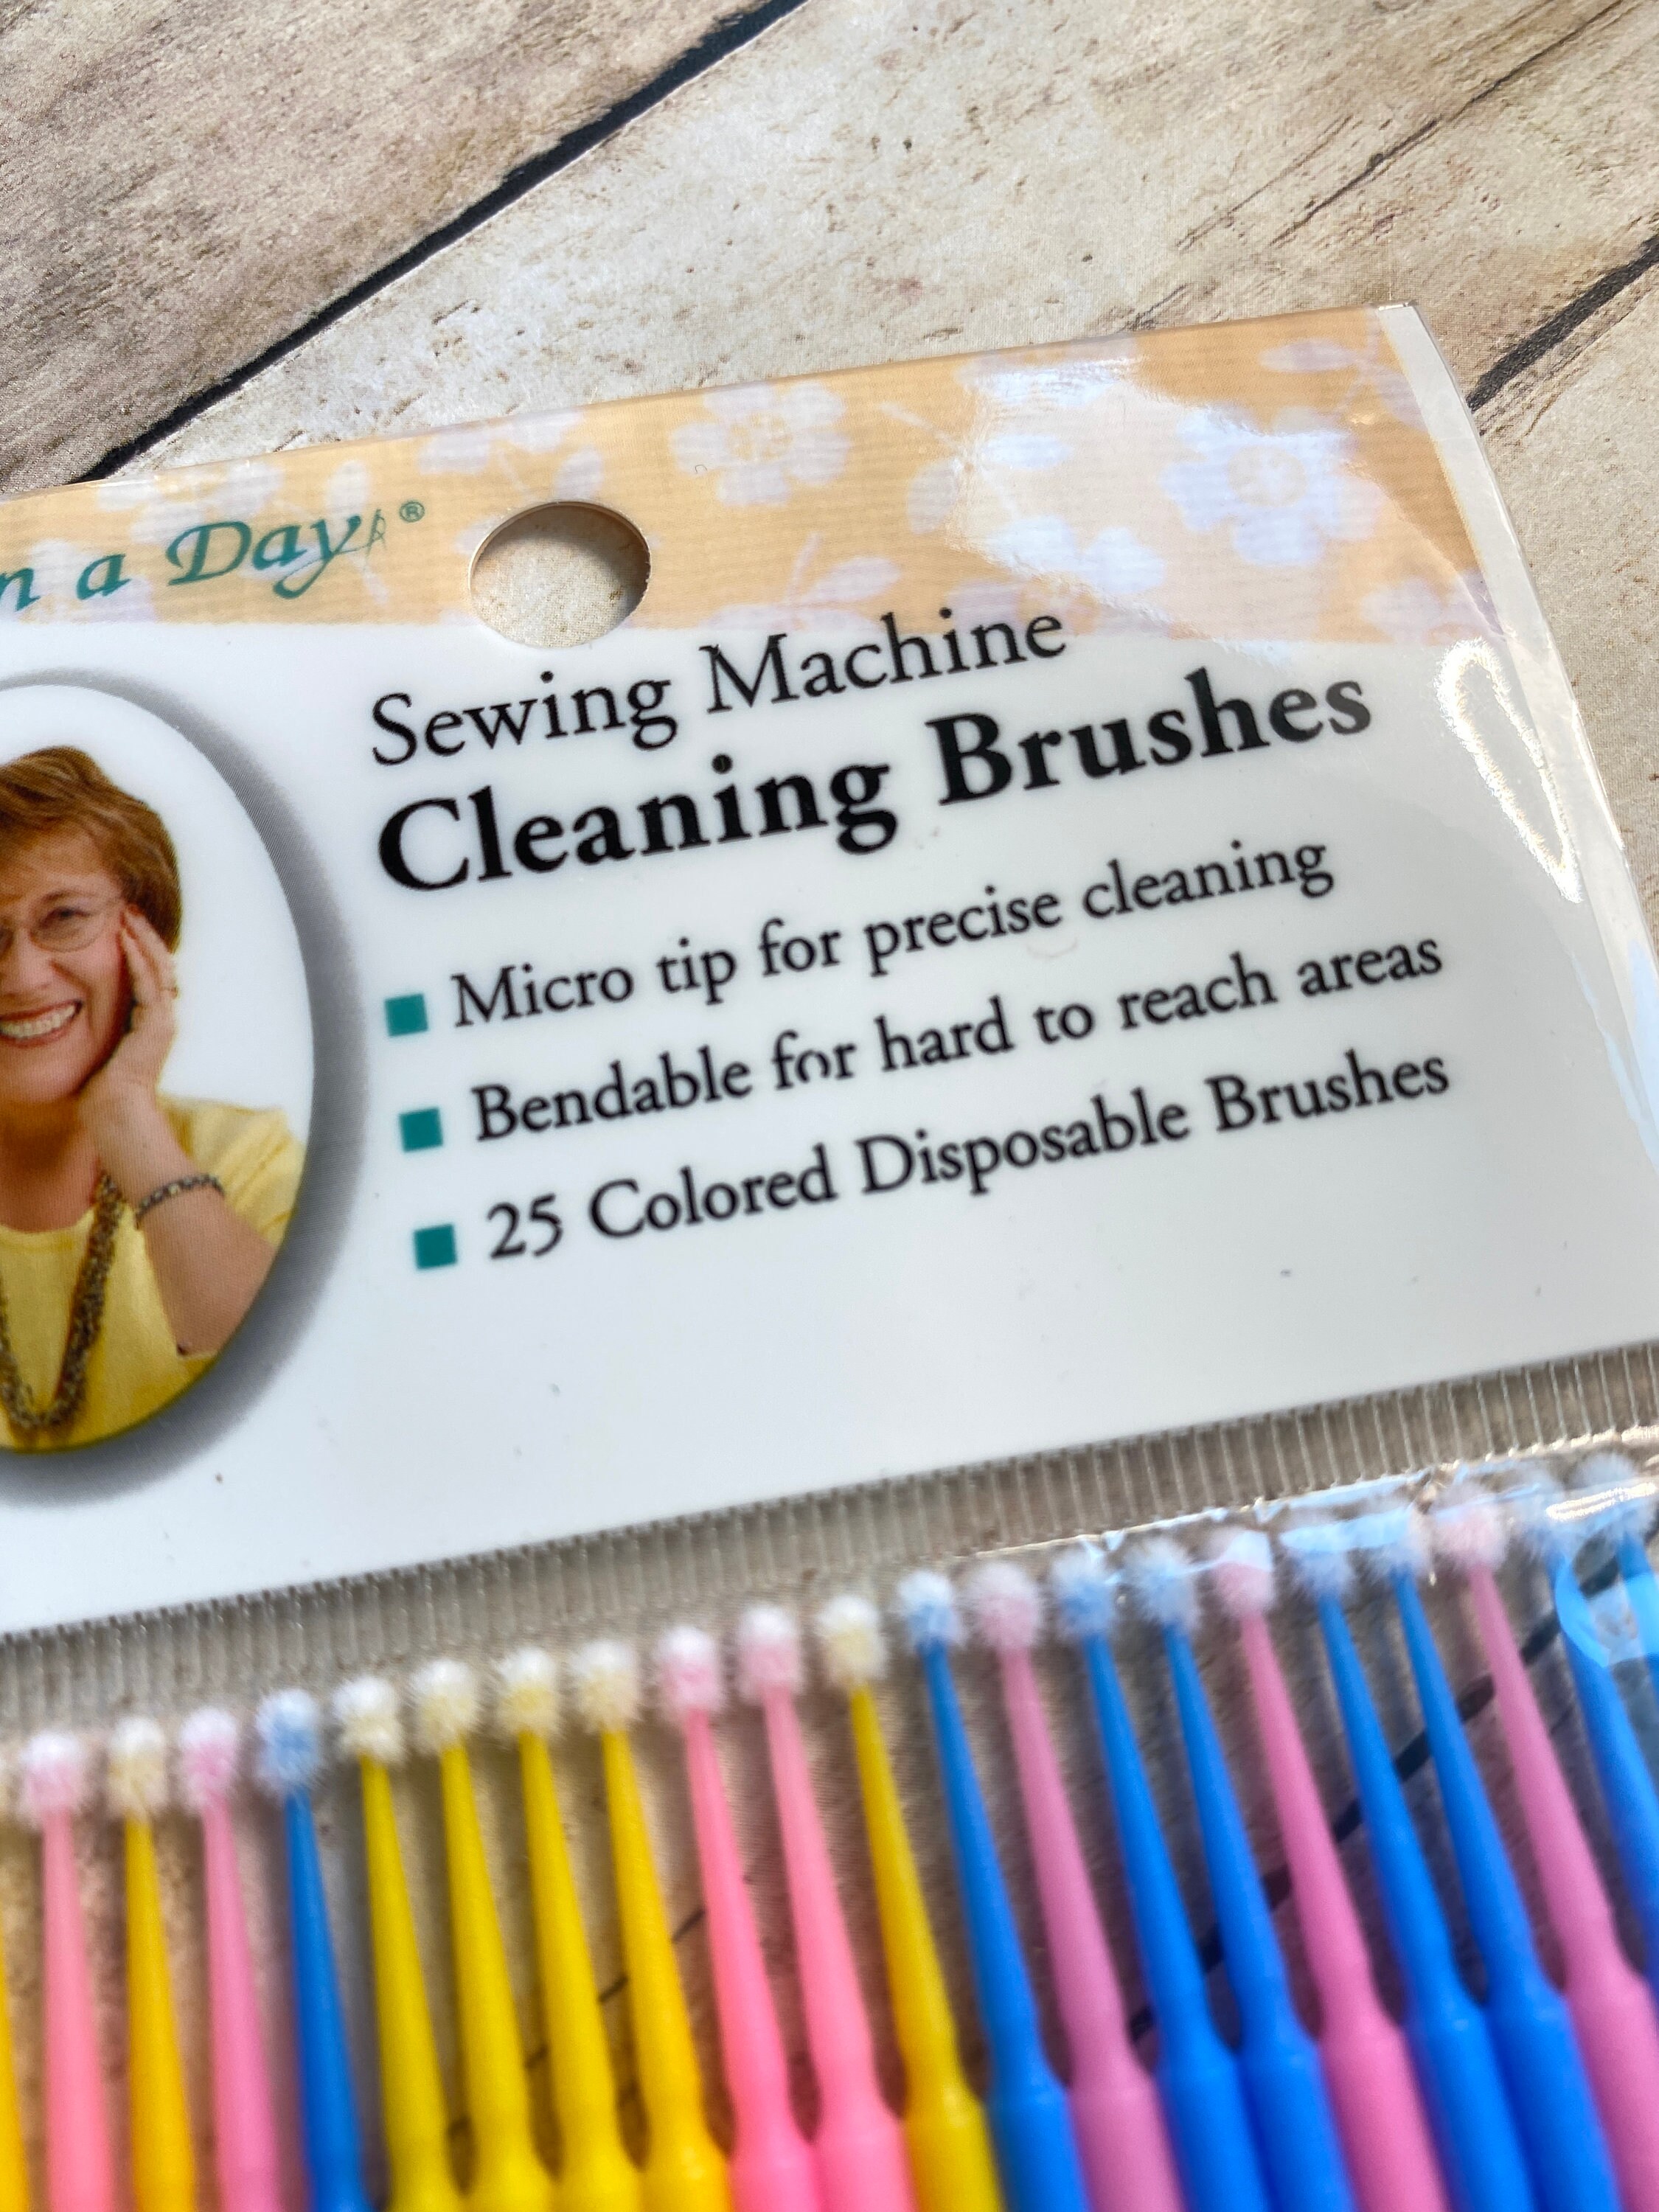 Sewing Machine Cleaning Brushes, MICRO TIP Bendable for Hard to